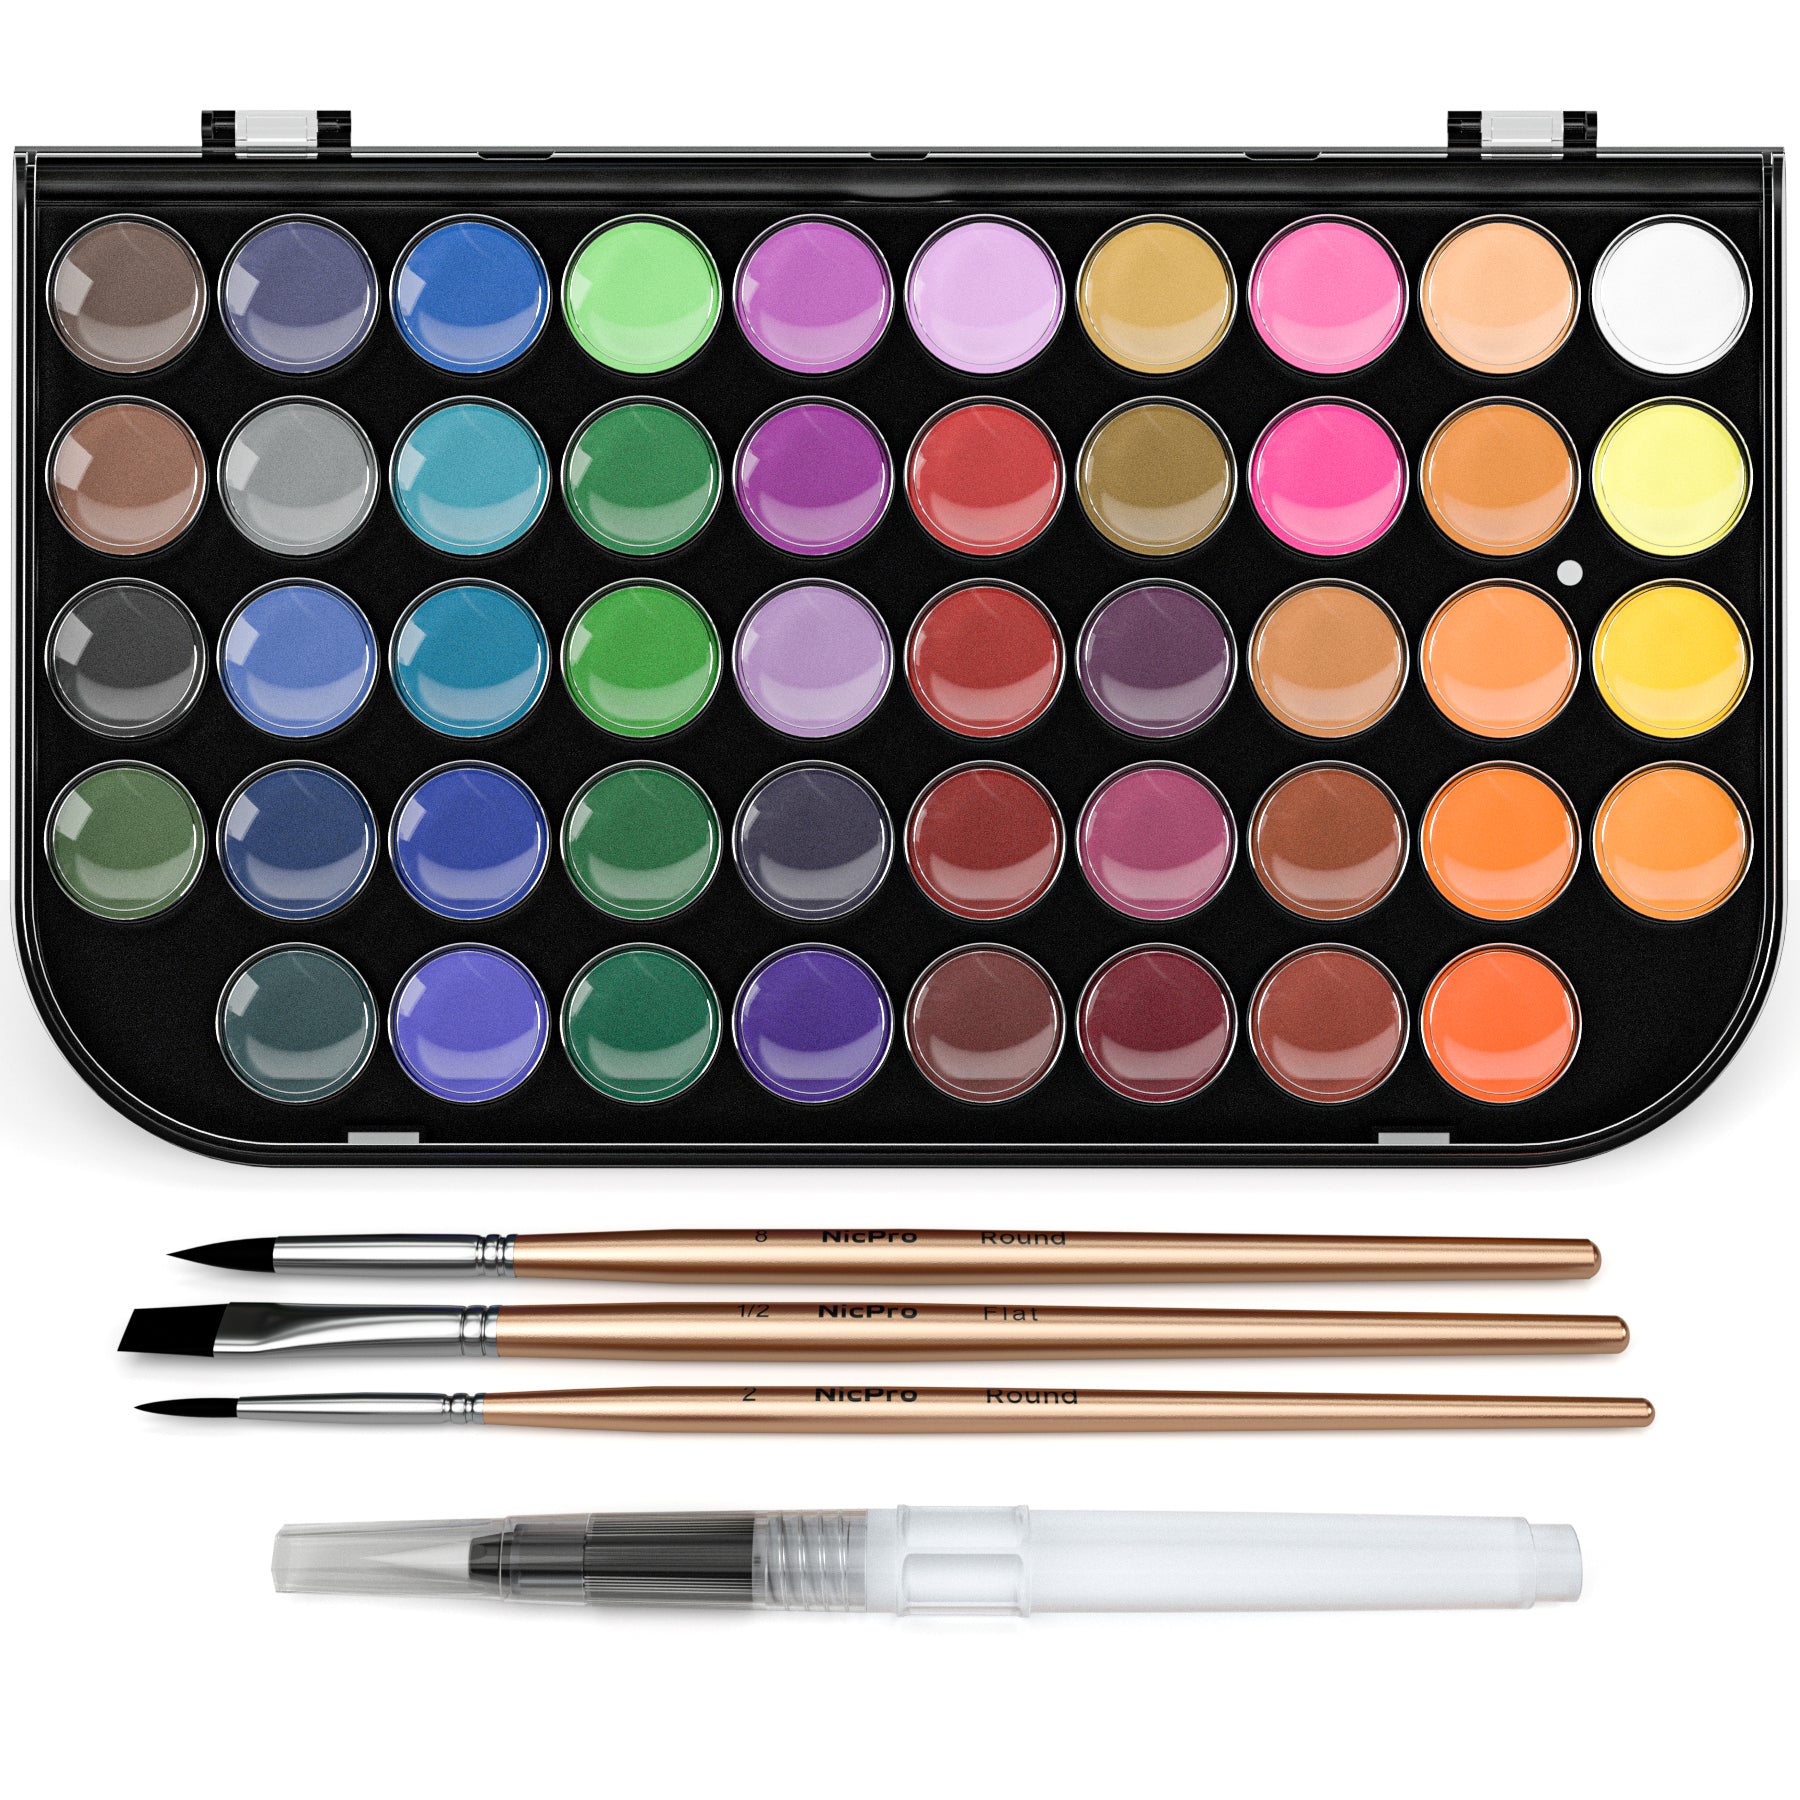 Watercolor Set Of 50 With Brush  Watercolor paint set, Paint set, Watercolor  kit